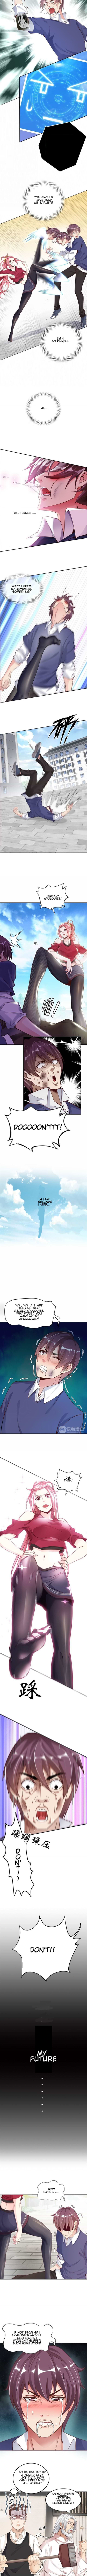 I Am An Invincible Genius Ch. 3 Chapter 3